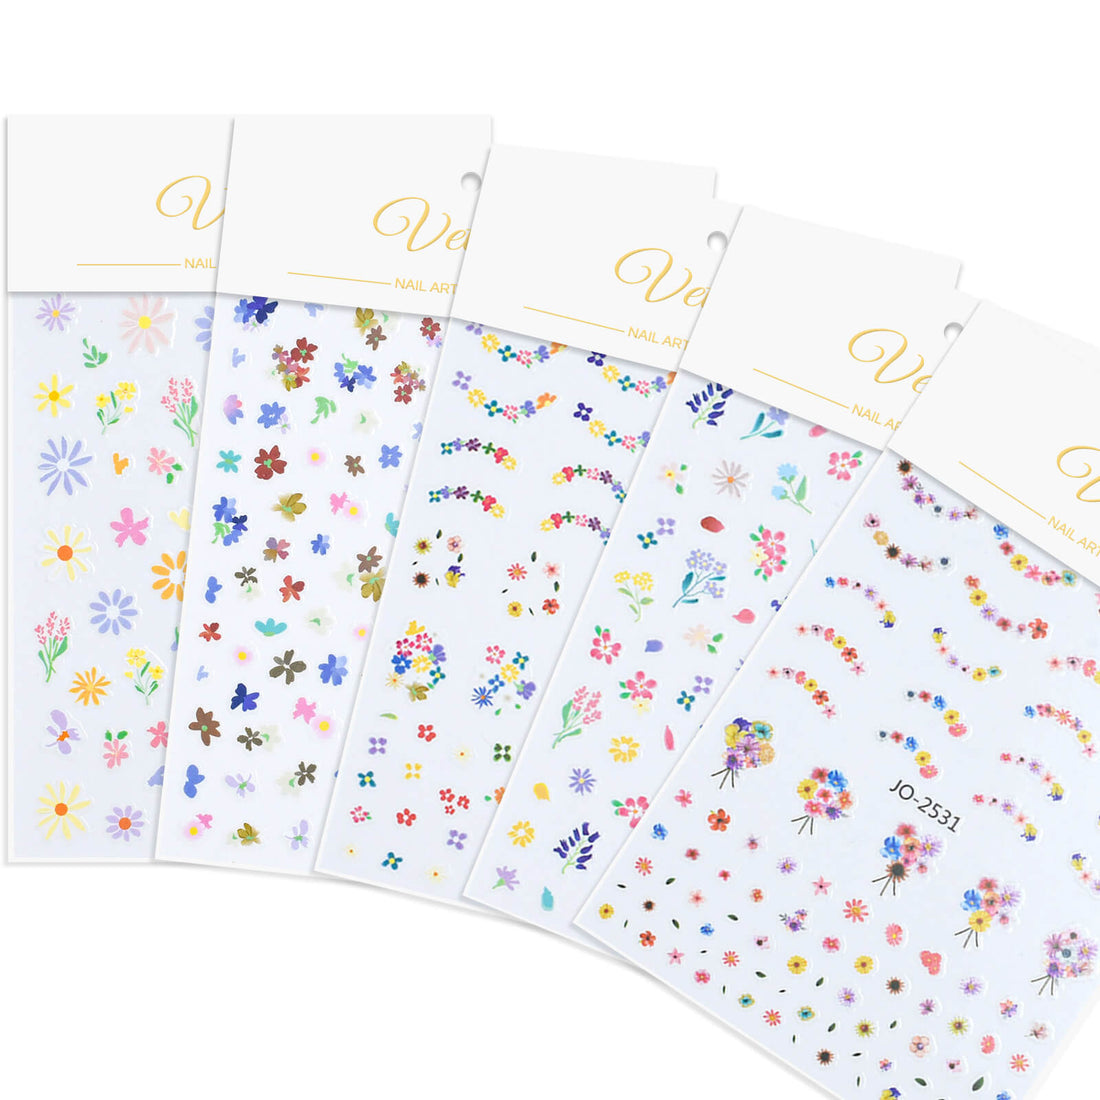 mini-colorful-nail-art-flower-stickers-floral-set-all